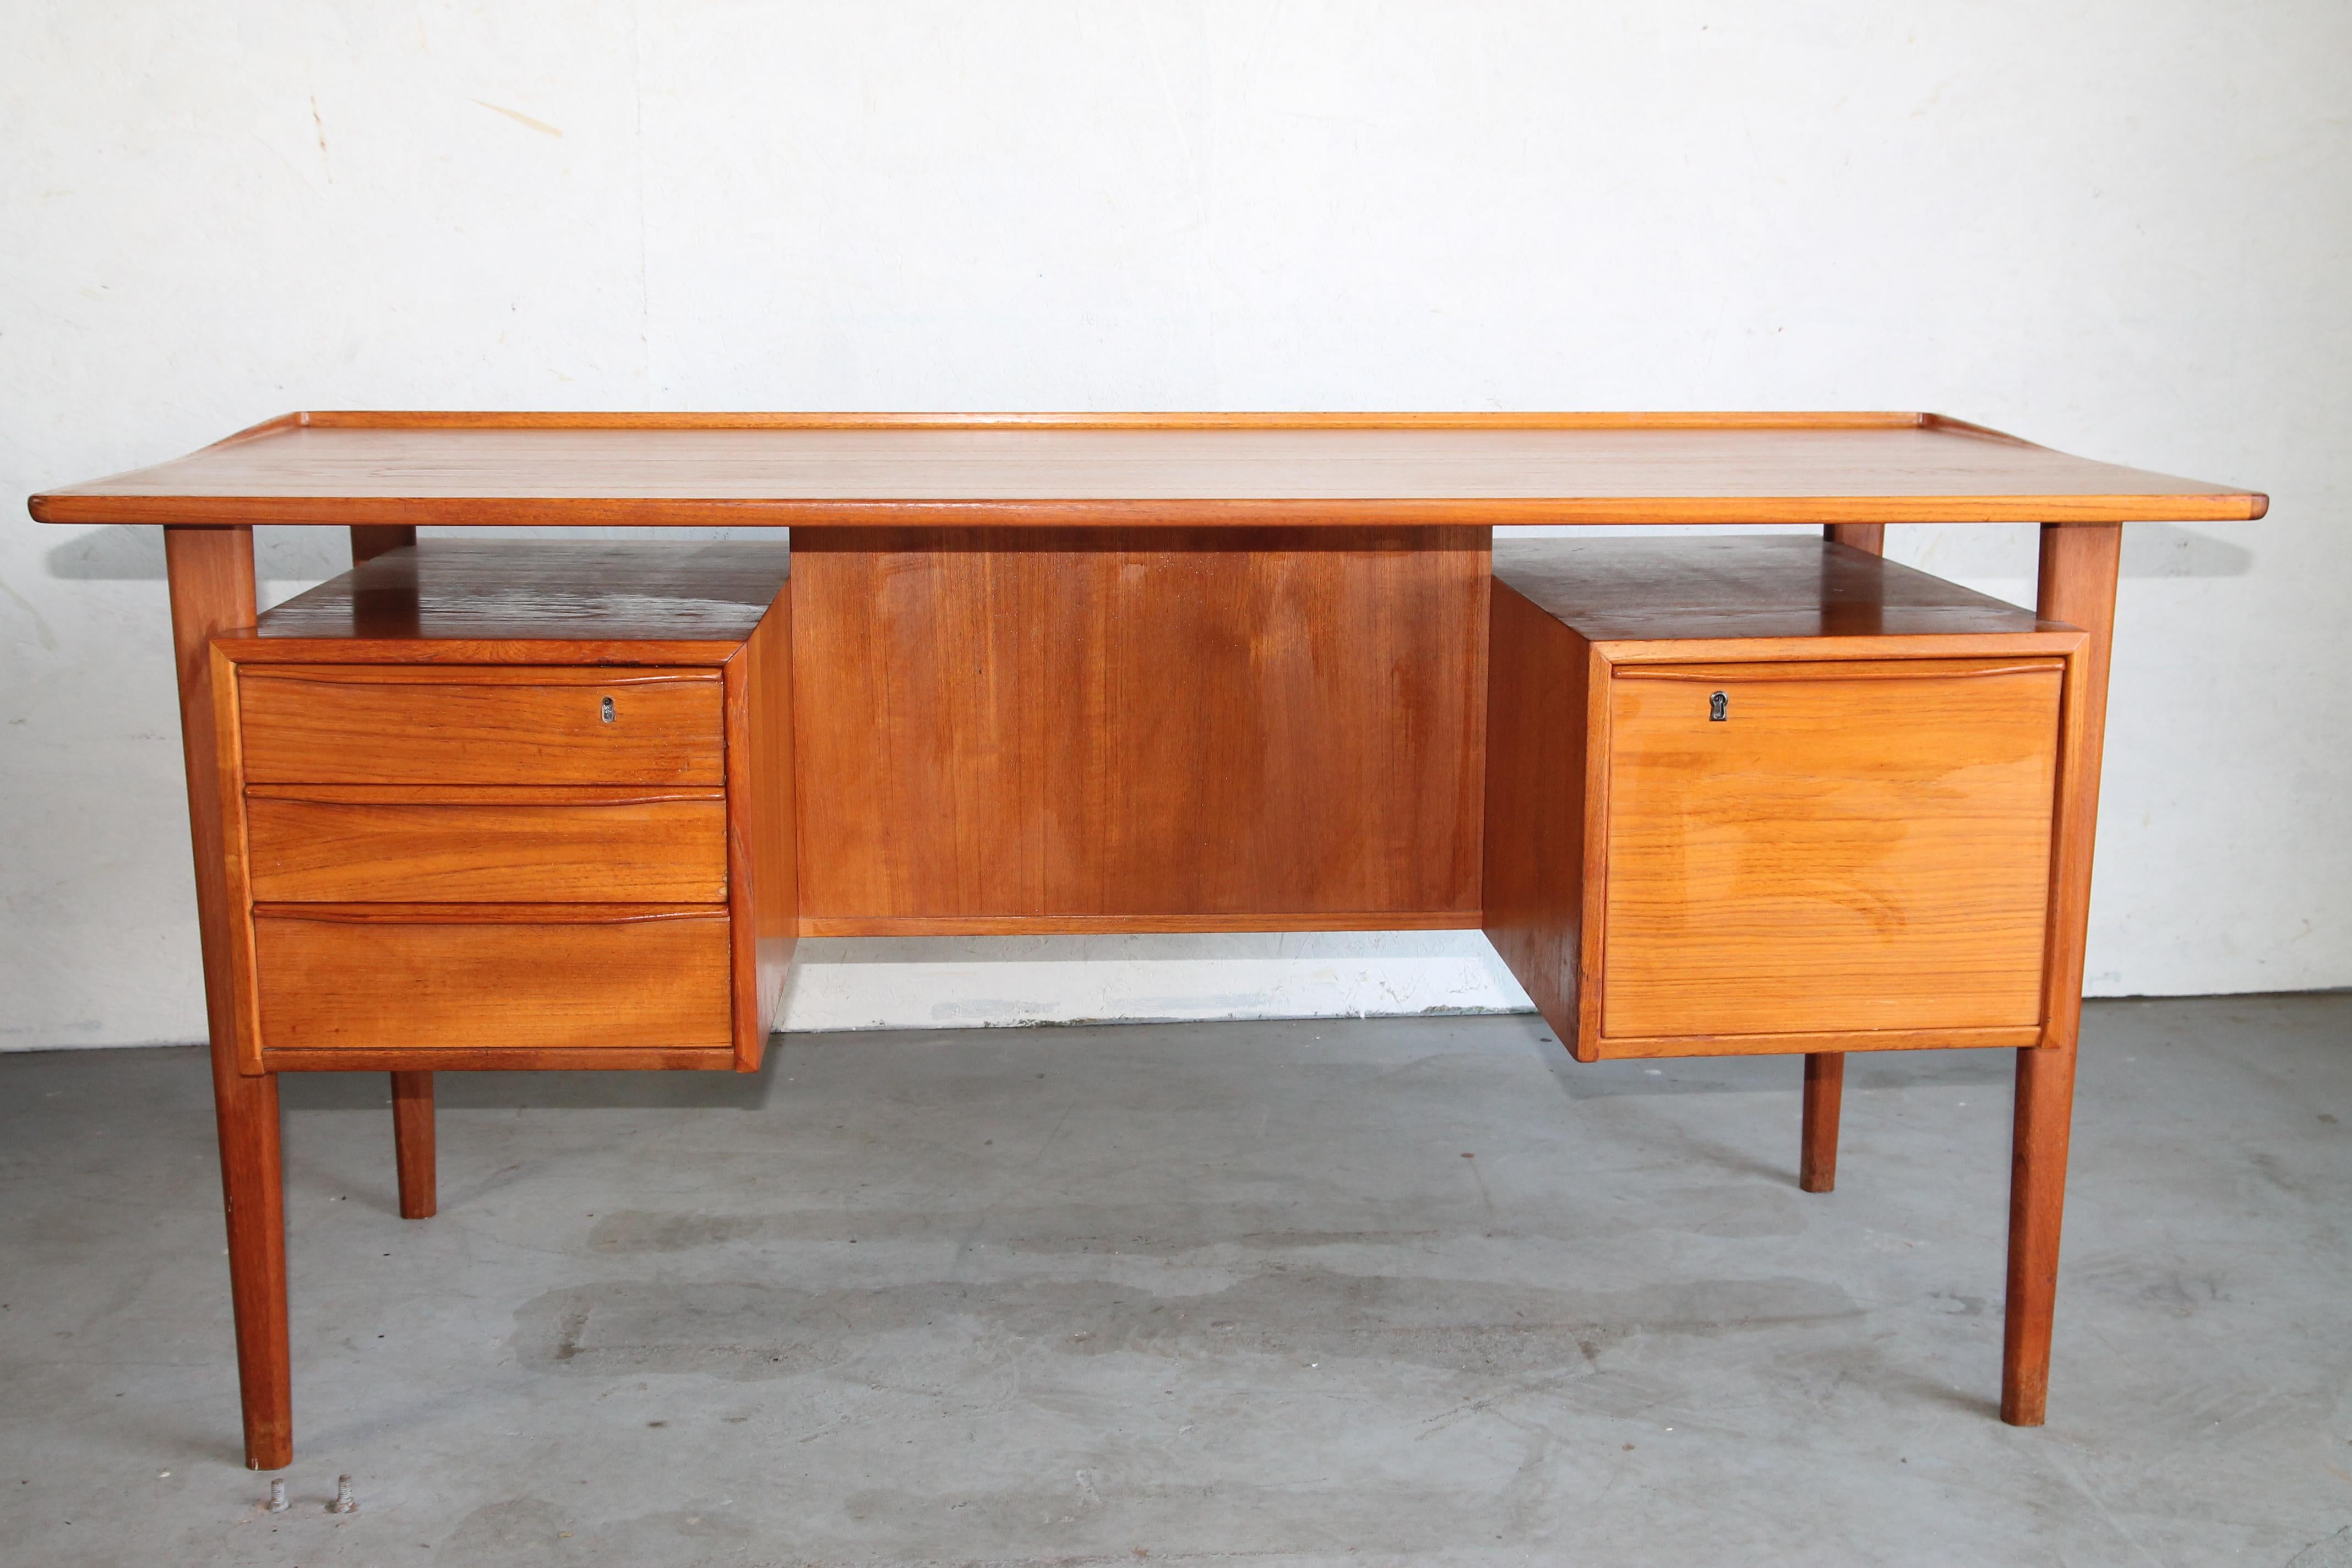 Great teak desk designed by Peter Lovig Nielsen for Lovig Design. Has floating top with file cabinet on the right side and 3 draws on the left. Two nice storage compartments in the front of the desk. See the photos for all the great details.